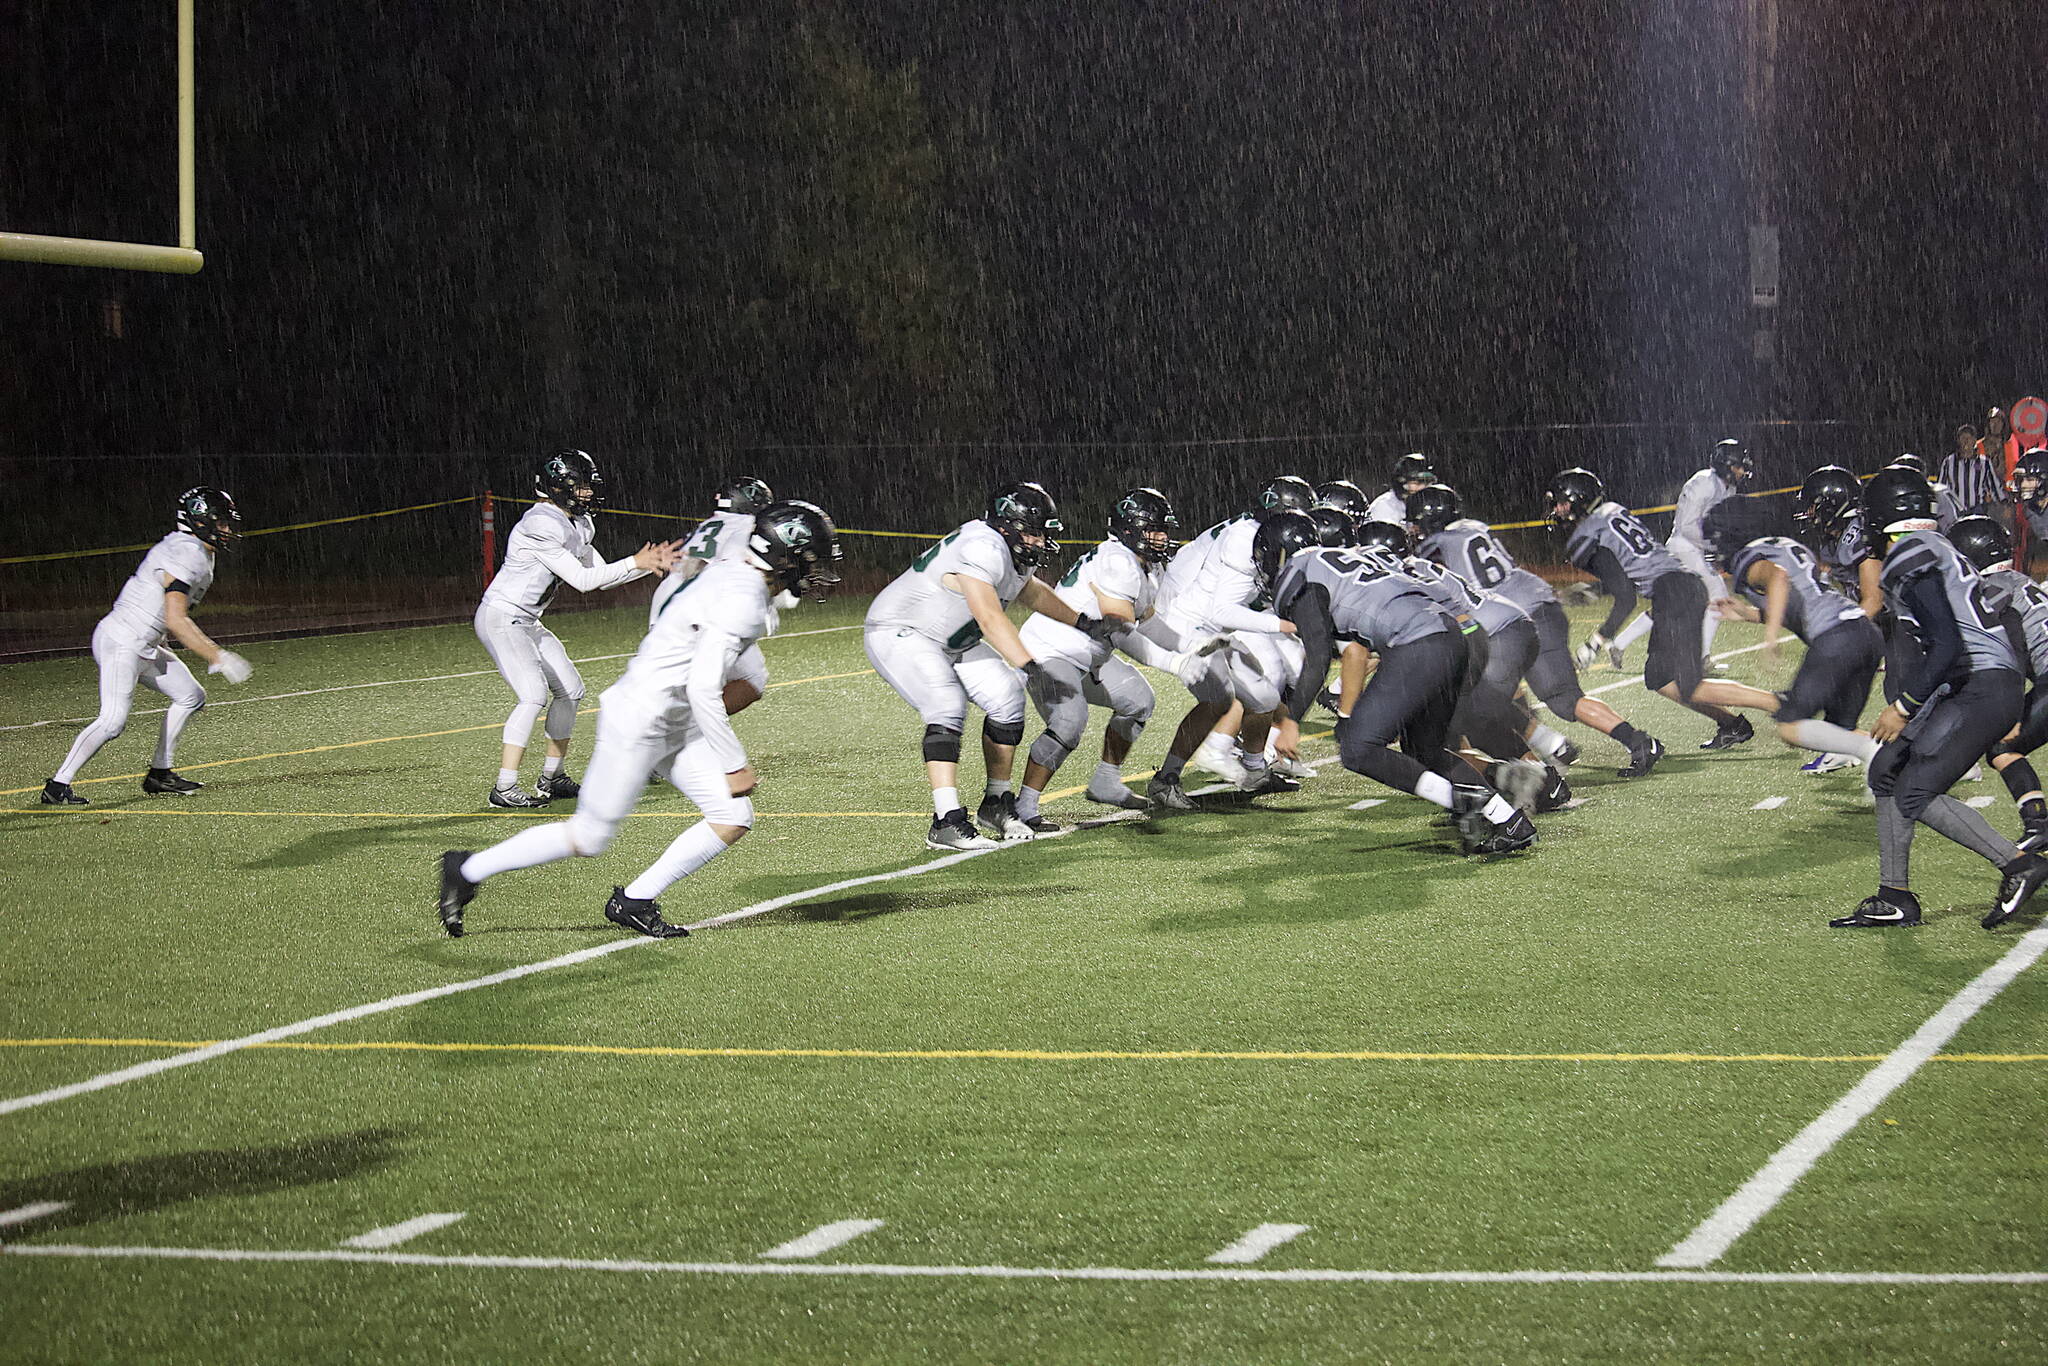 Colony tries to get out of its own end zone after a punt pins them at the 1-yard line during their game against the Juneau Huskies on Friday night at Adair-Kennedy Field. (Mark Sabbatini / Juneau Empire)